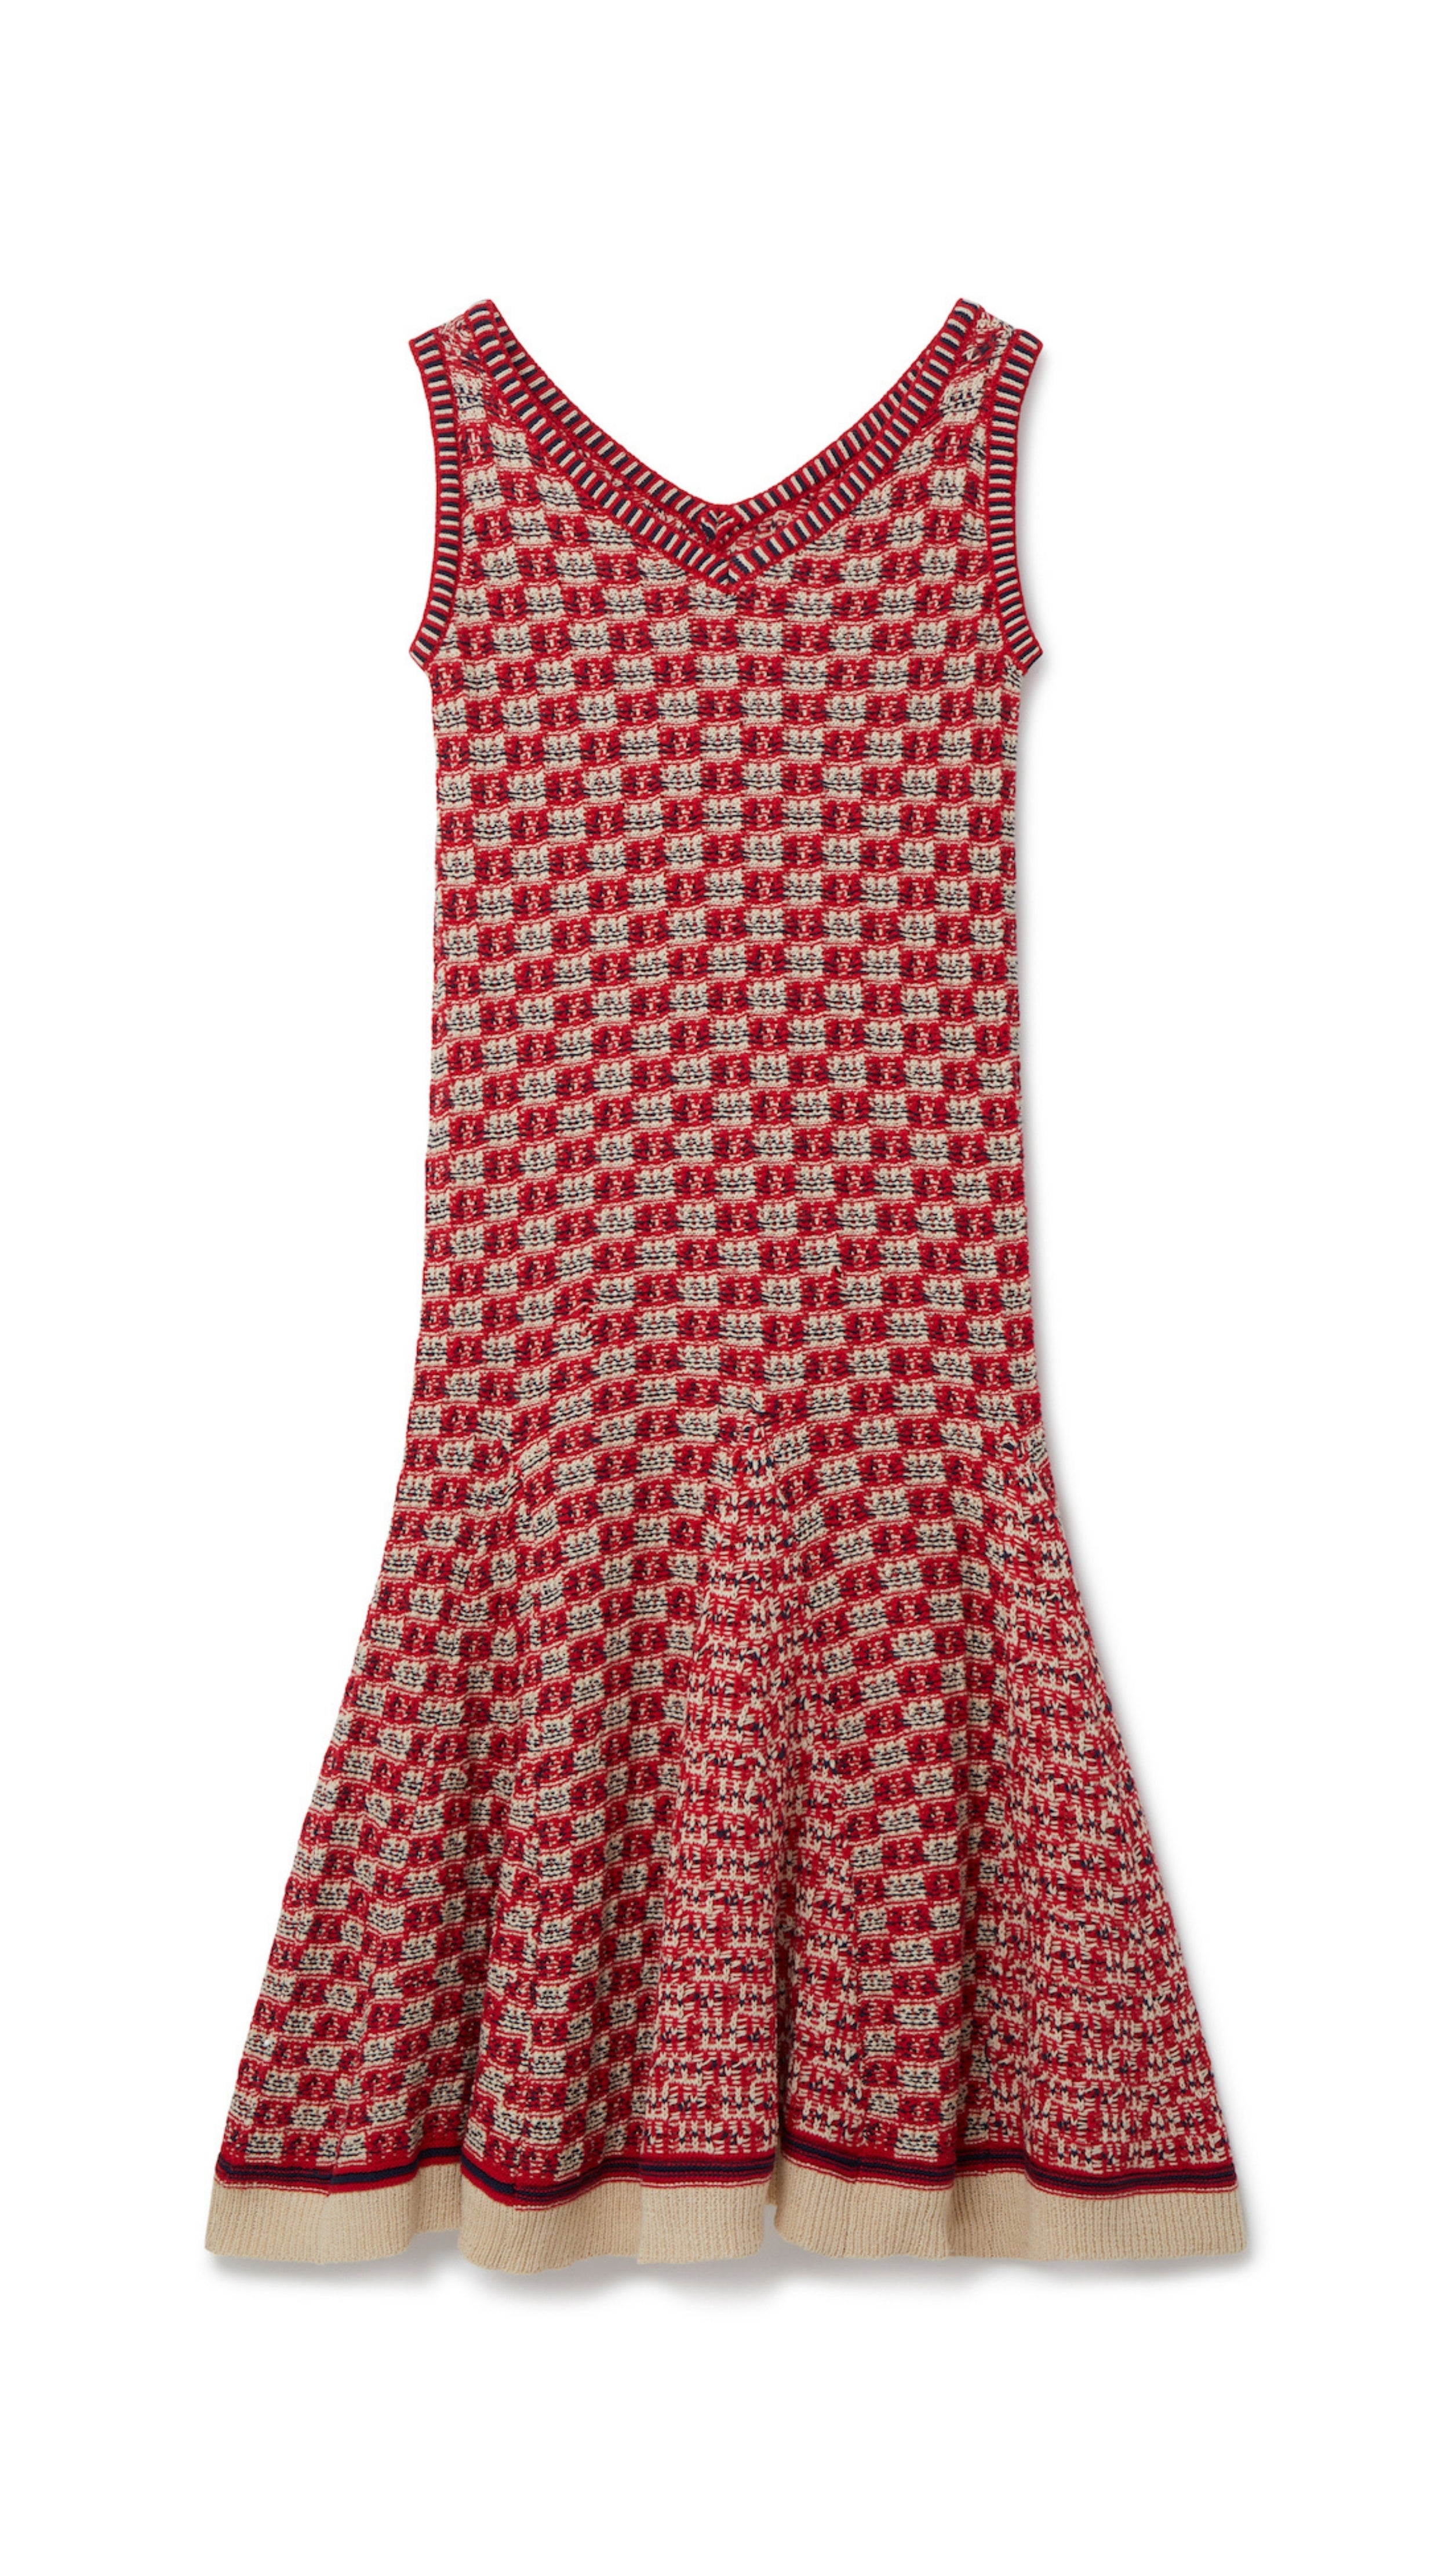 Wales Bonner Soar Godet Dress Woven in an light weight summer Italian cotton knit. This midi length dress has a checkered pattern in red, ivory and black. It has a v-neckline and slightly flared skirt that falls just below the knee. Product flat photo.